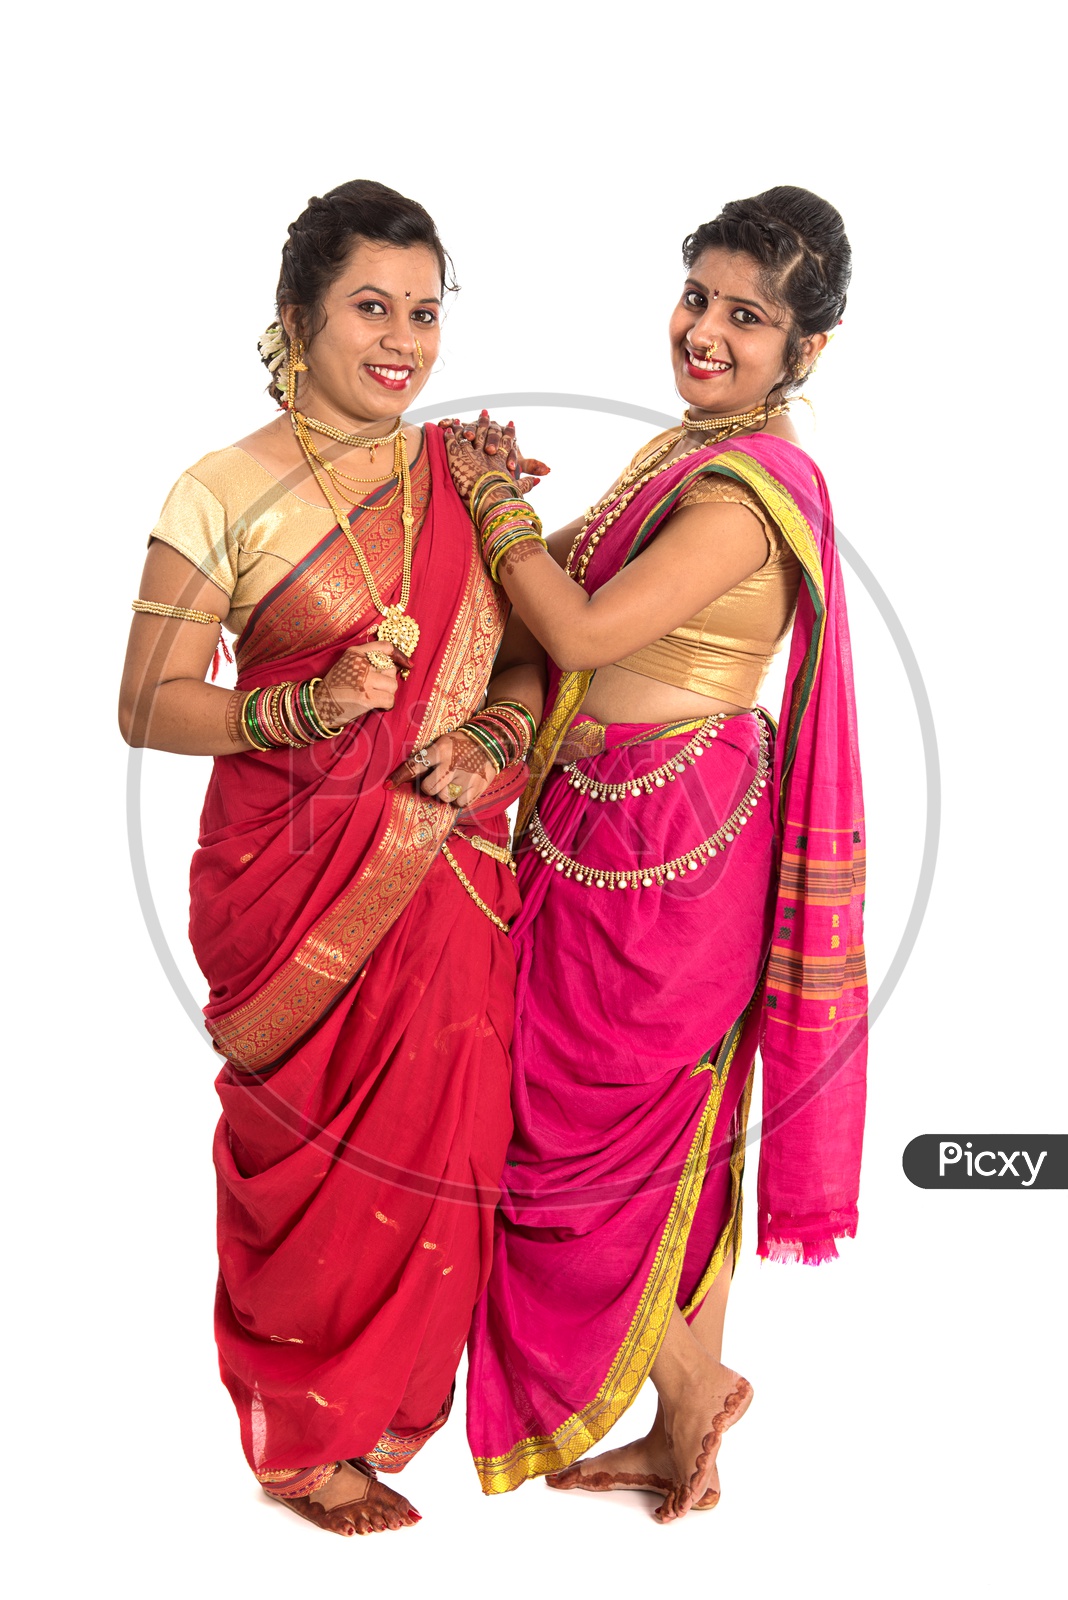 Image of Portrait Of a Young Traditional Marathi Woman Wearing an Elegant  Sari And Posing With Smile Face And With Expression On an Isolated White  Background-SF980106-Picxy